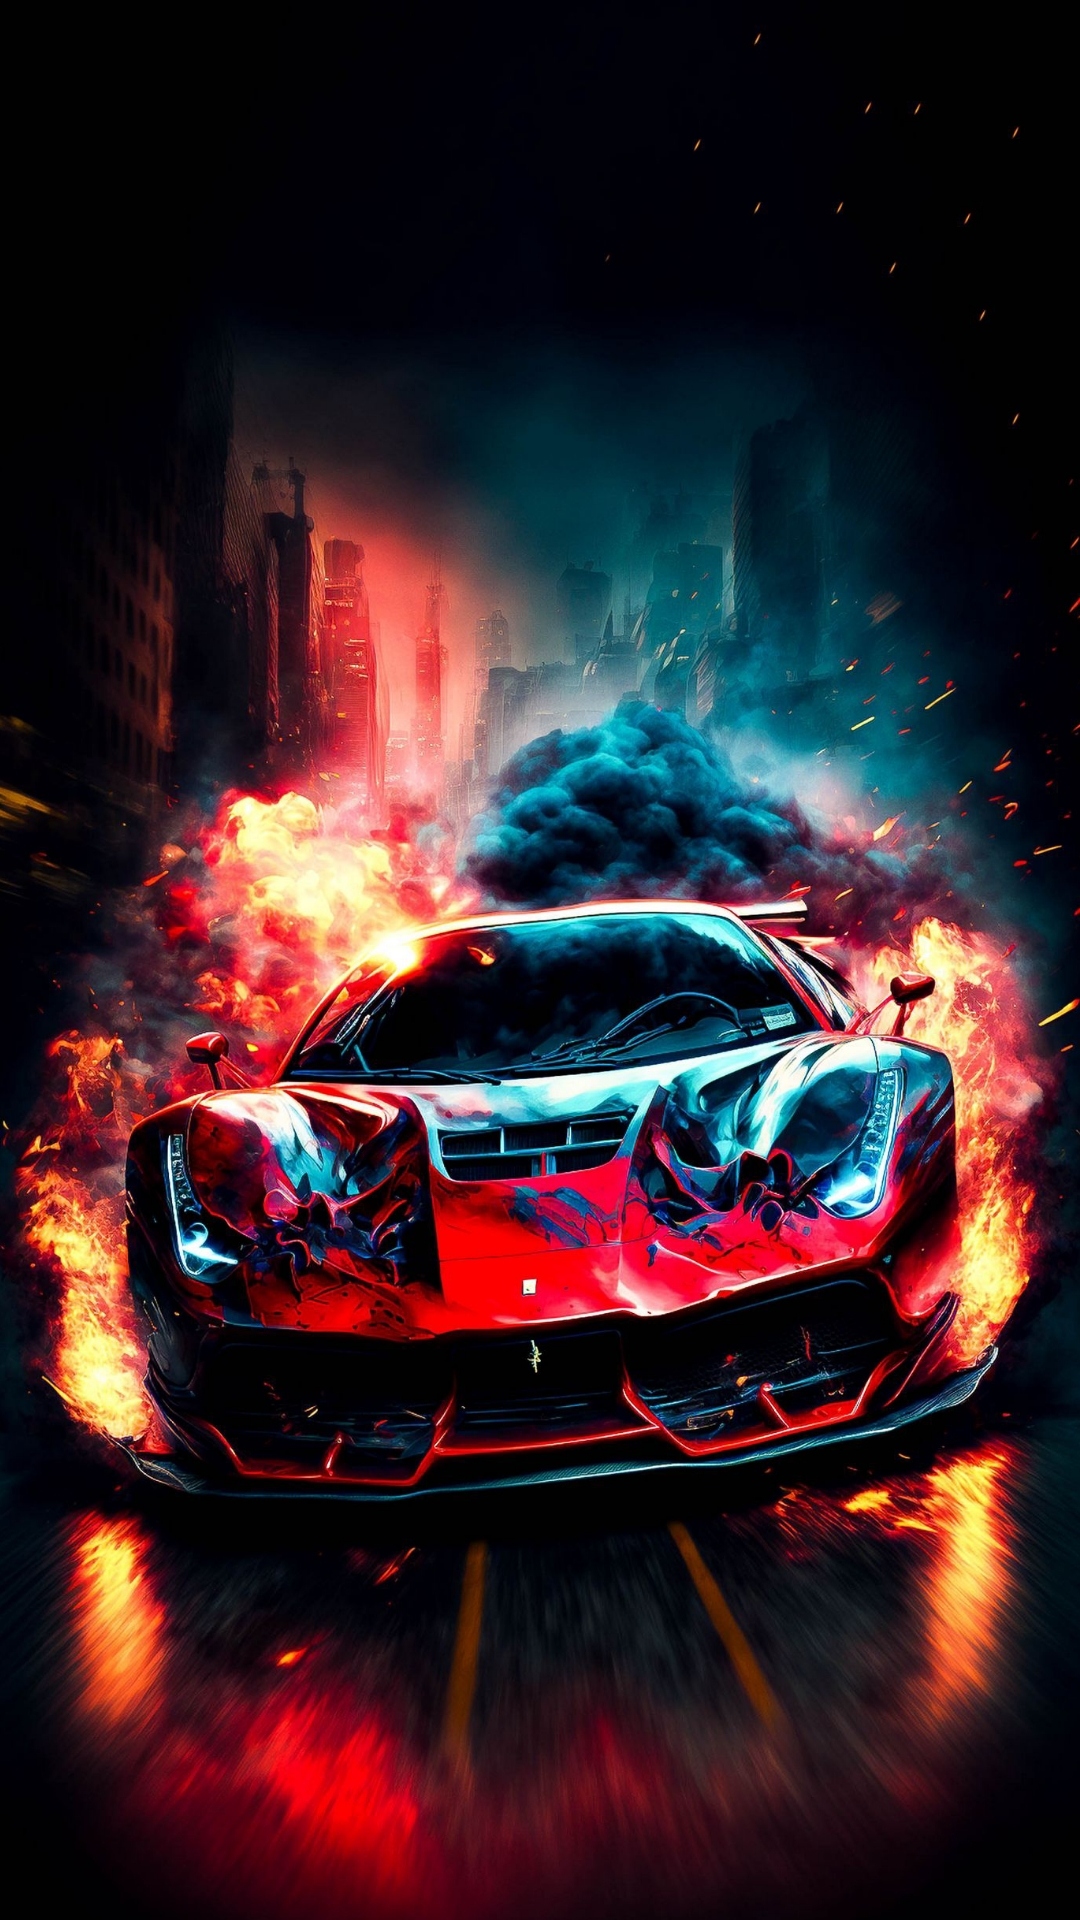 Coolest Awesome Car Wallpaper Coolest Awesome Car Wallpaper [ HQ ]